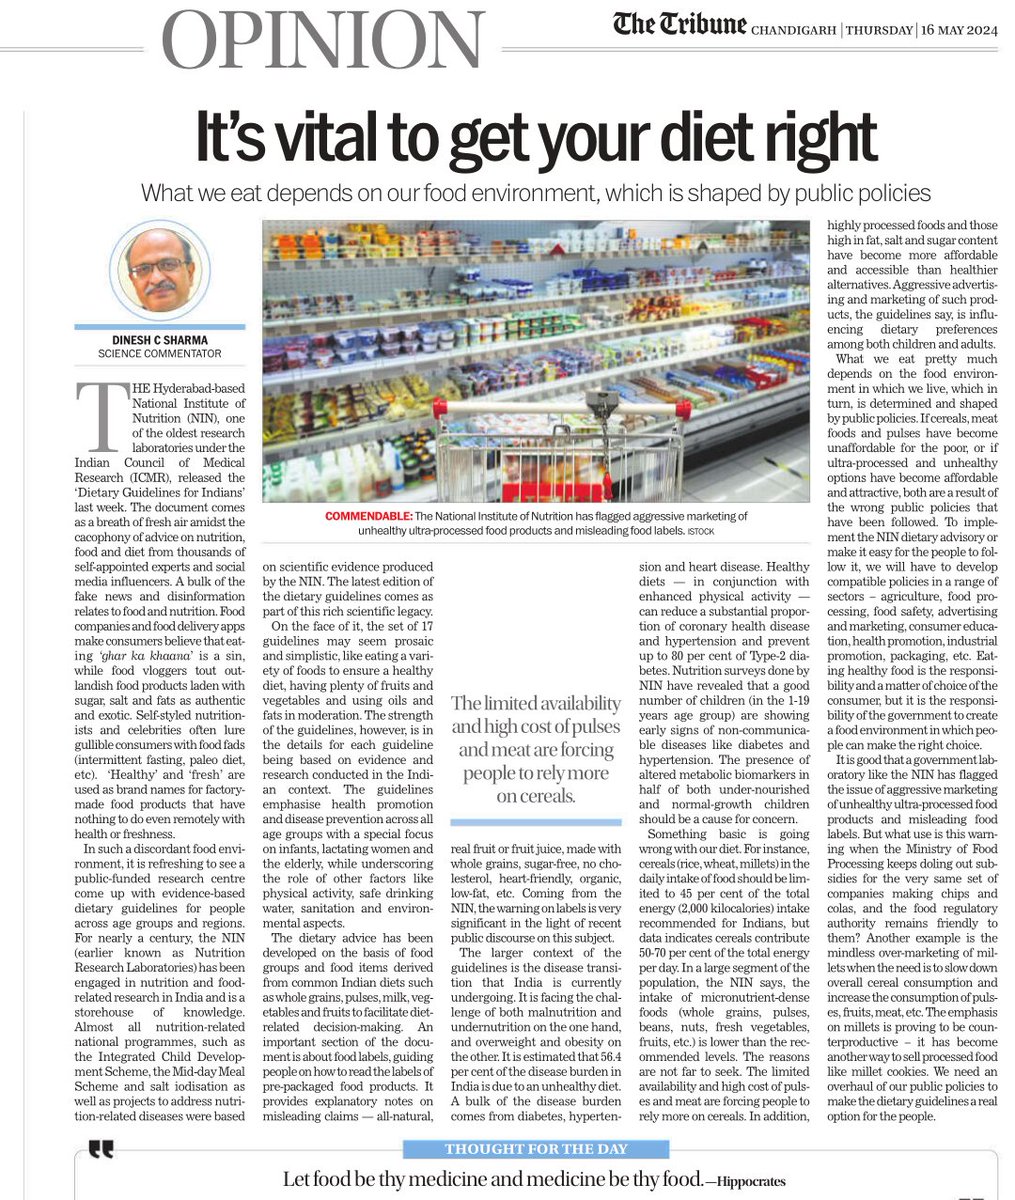 While dietary guidelines released by NIN are great, we need public policies that improve our food environment and let people make healthier choices. My take via @thetribunechd